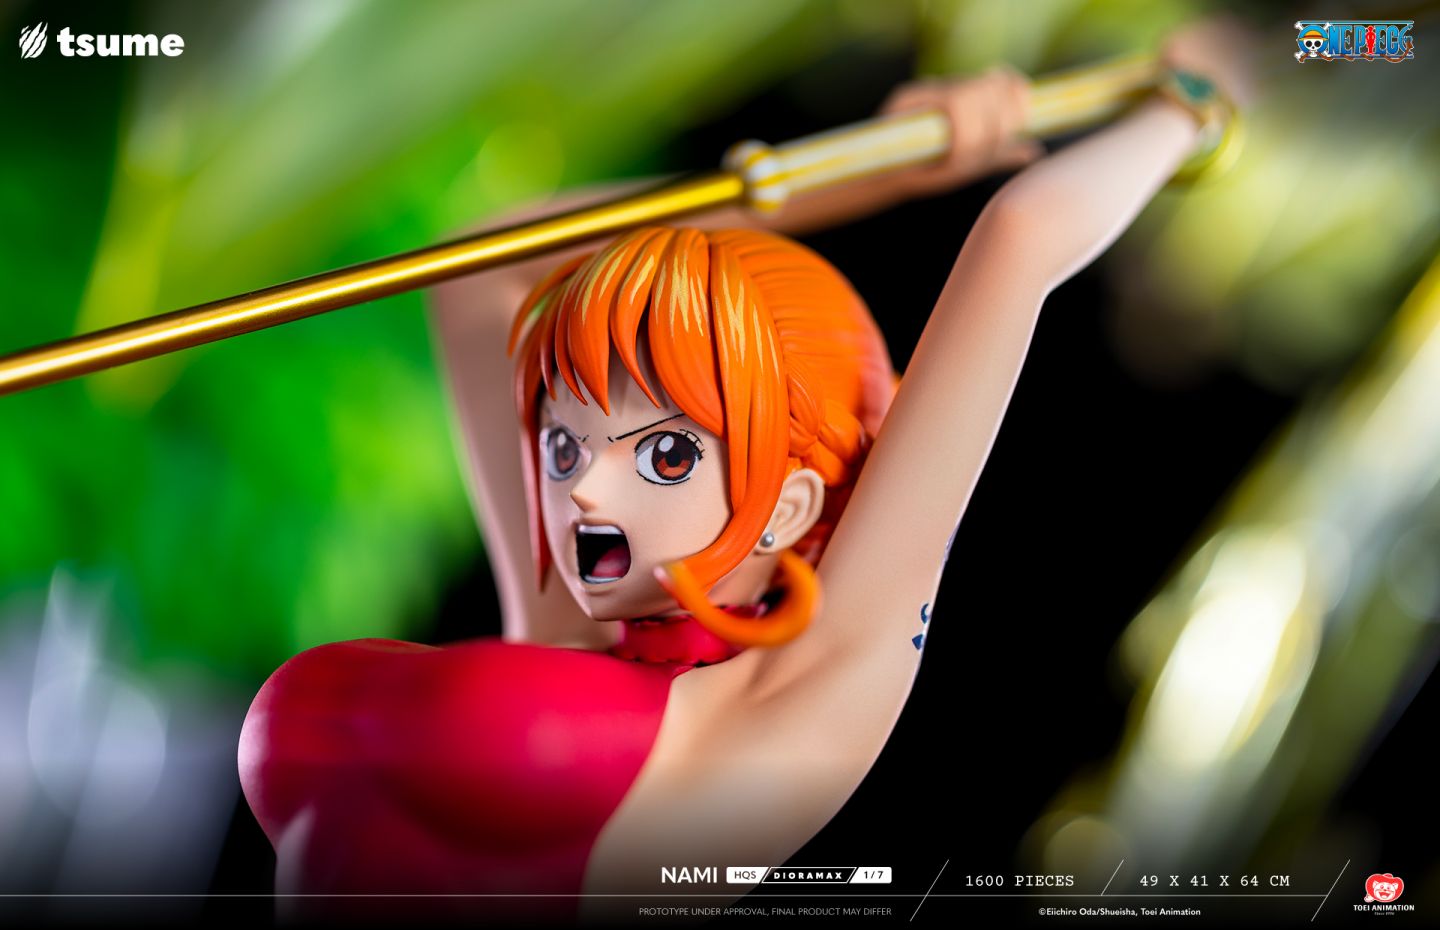 Tsume - HQS Dioramax - One Piece - Nami (1/7 Scale) - Marvelous Toys